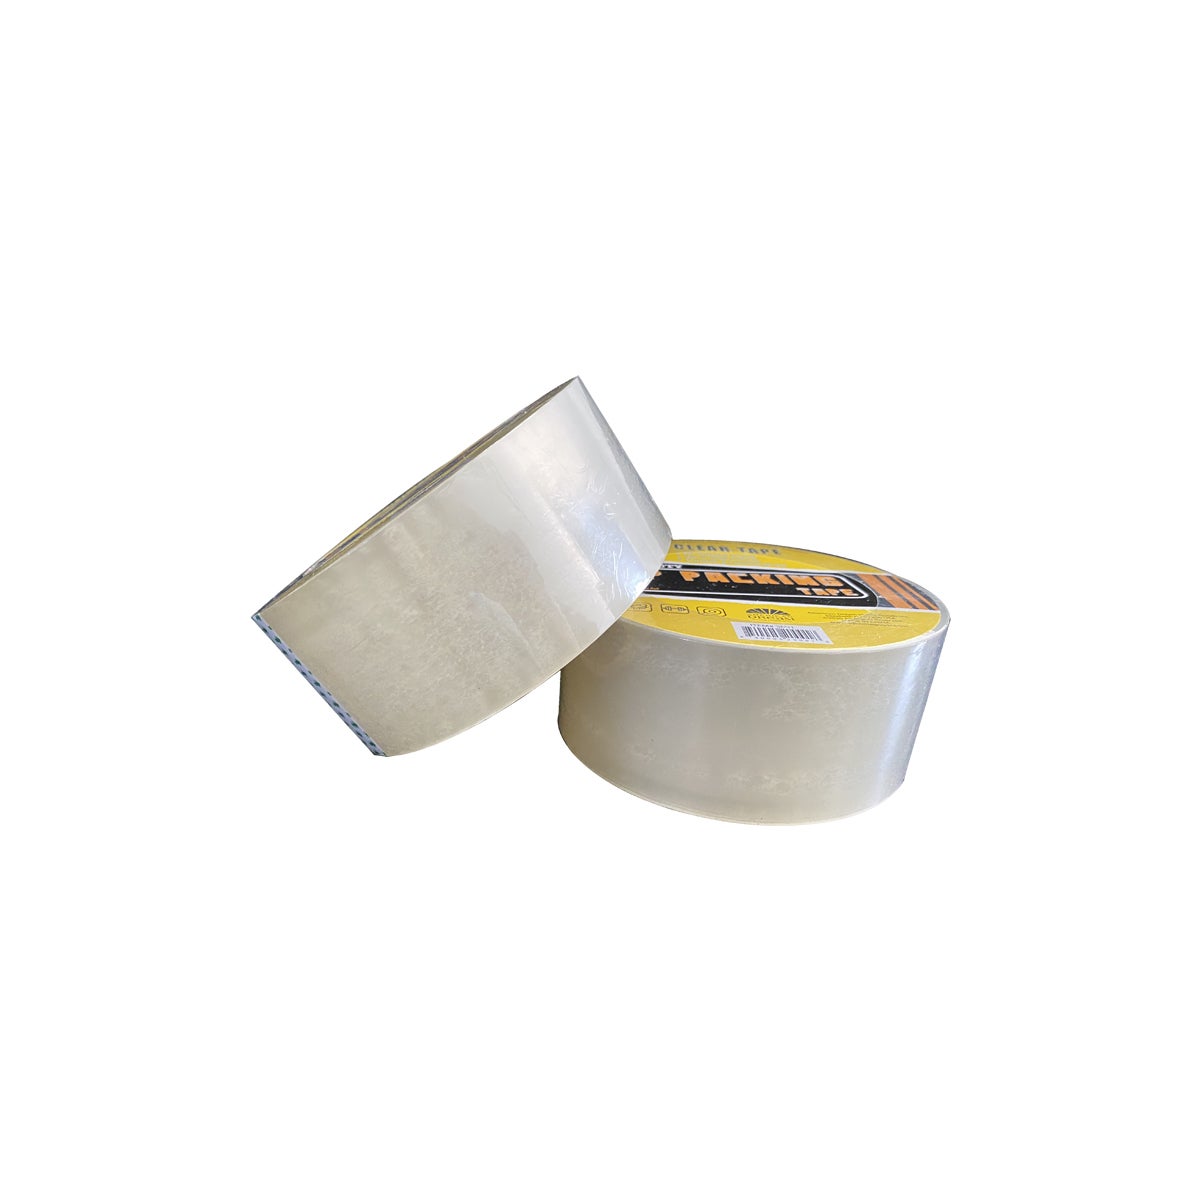 100M Clear OPP Packing Tape (36) - coming soon